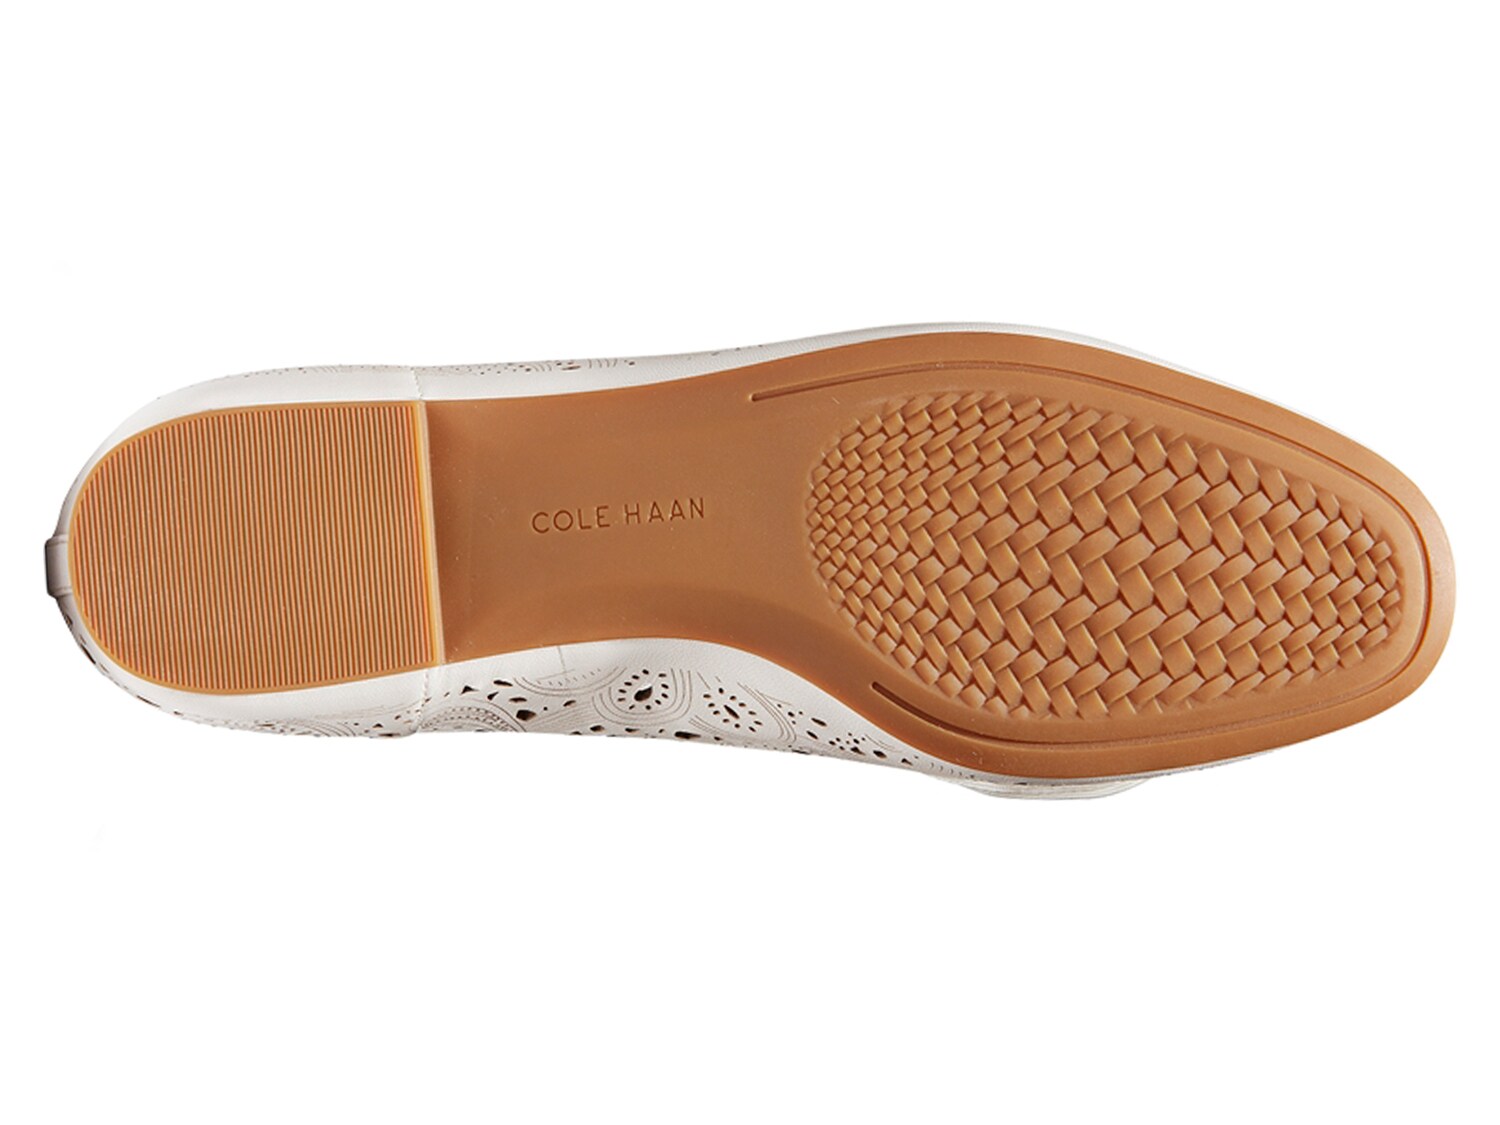 Cole Haan Tali  Loafer Women s Shoes  DSW